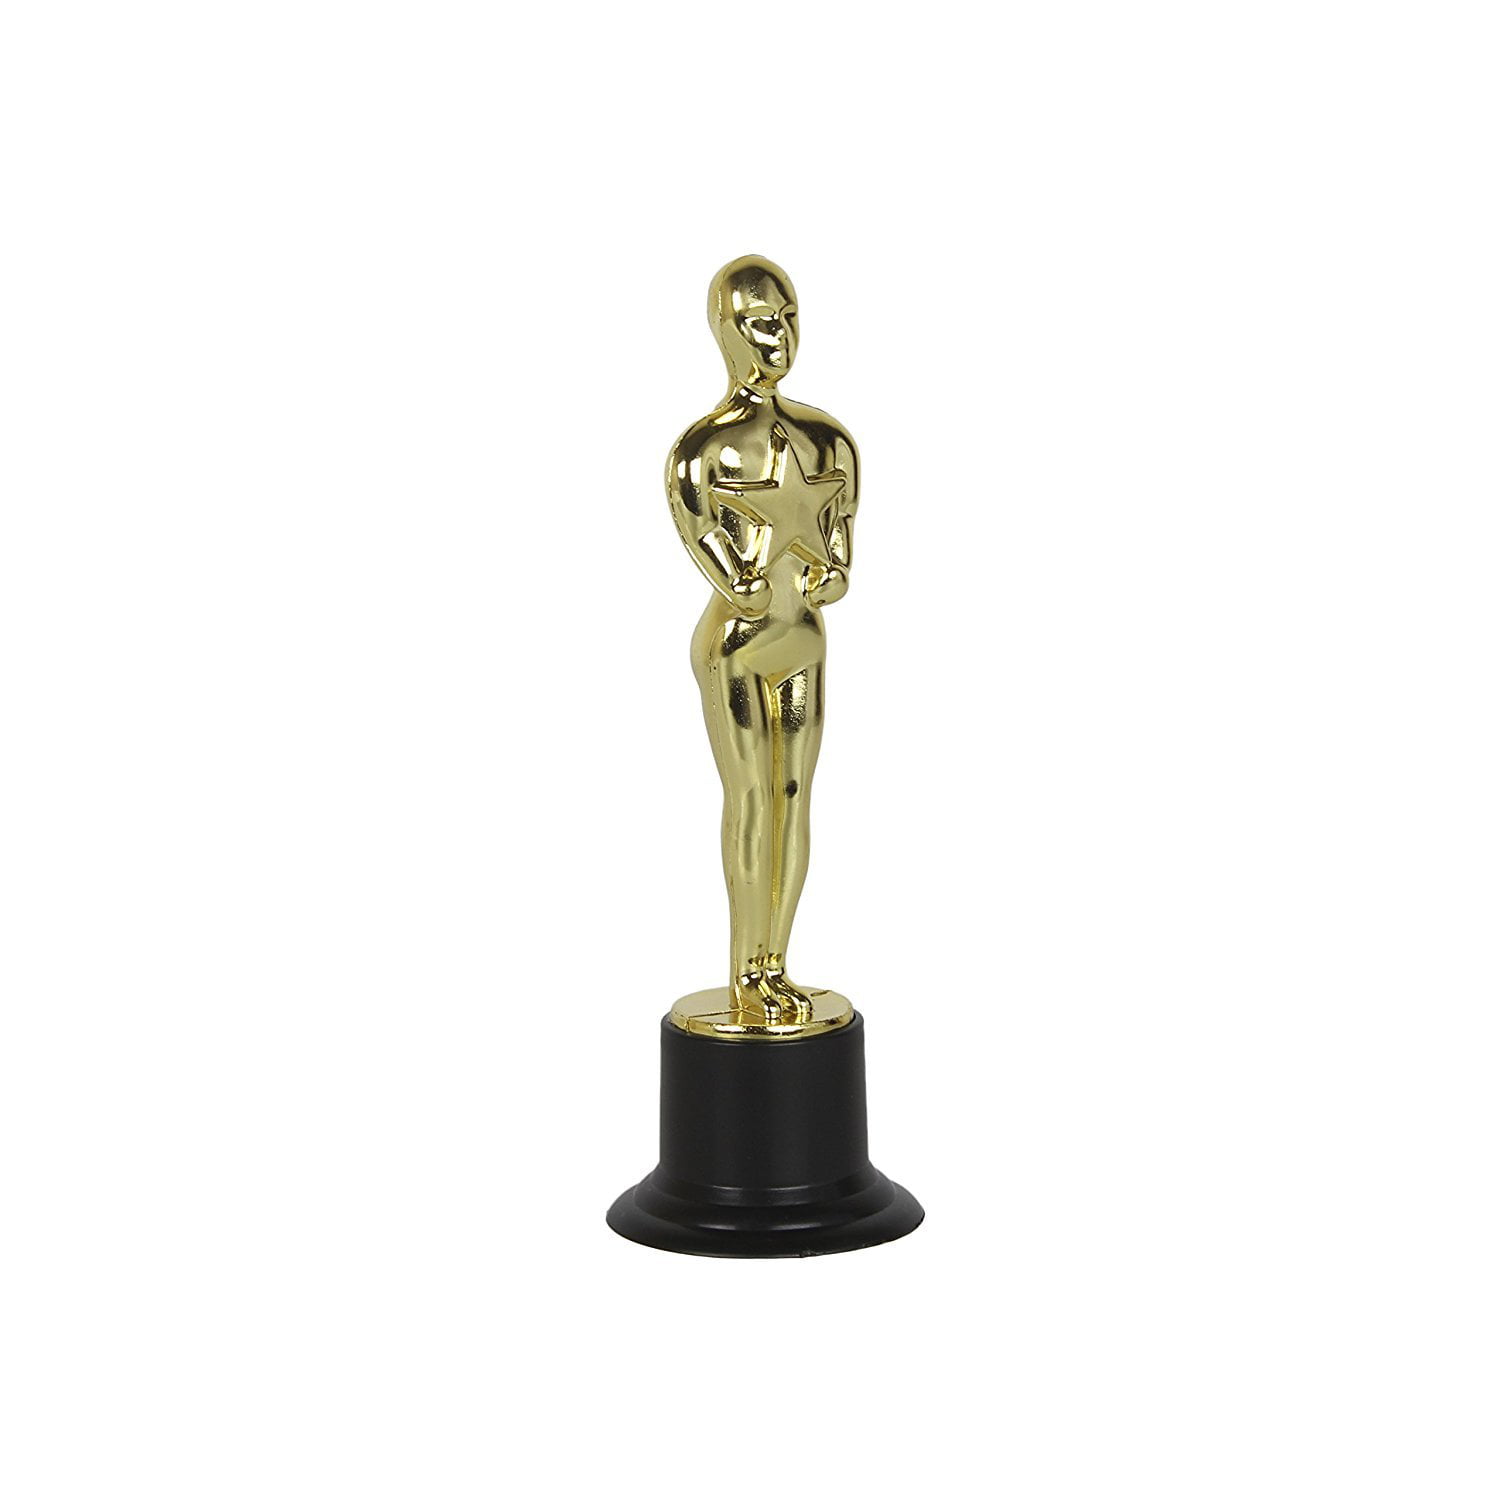 BESPORTBLE Gold Award Trophies Soccer Trophy Statues Recognition Sport Rewards for Football Soccor Sports Competitions Awards Party Favors Gift 